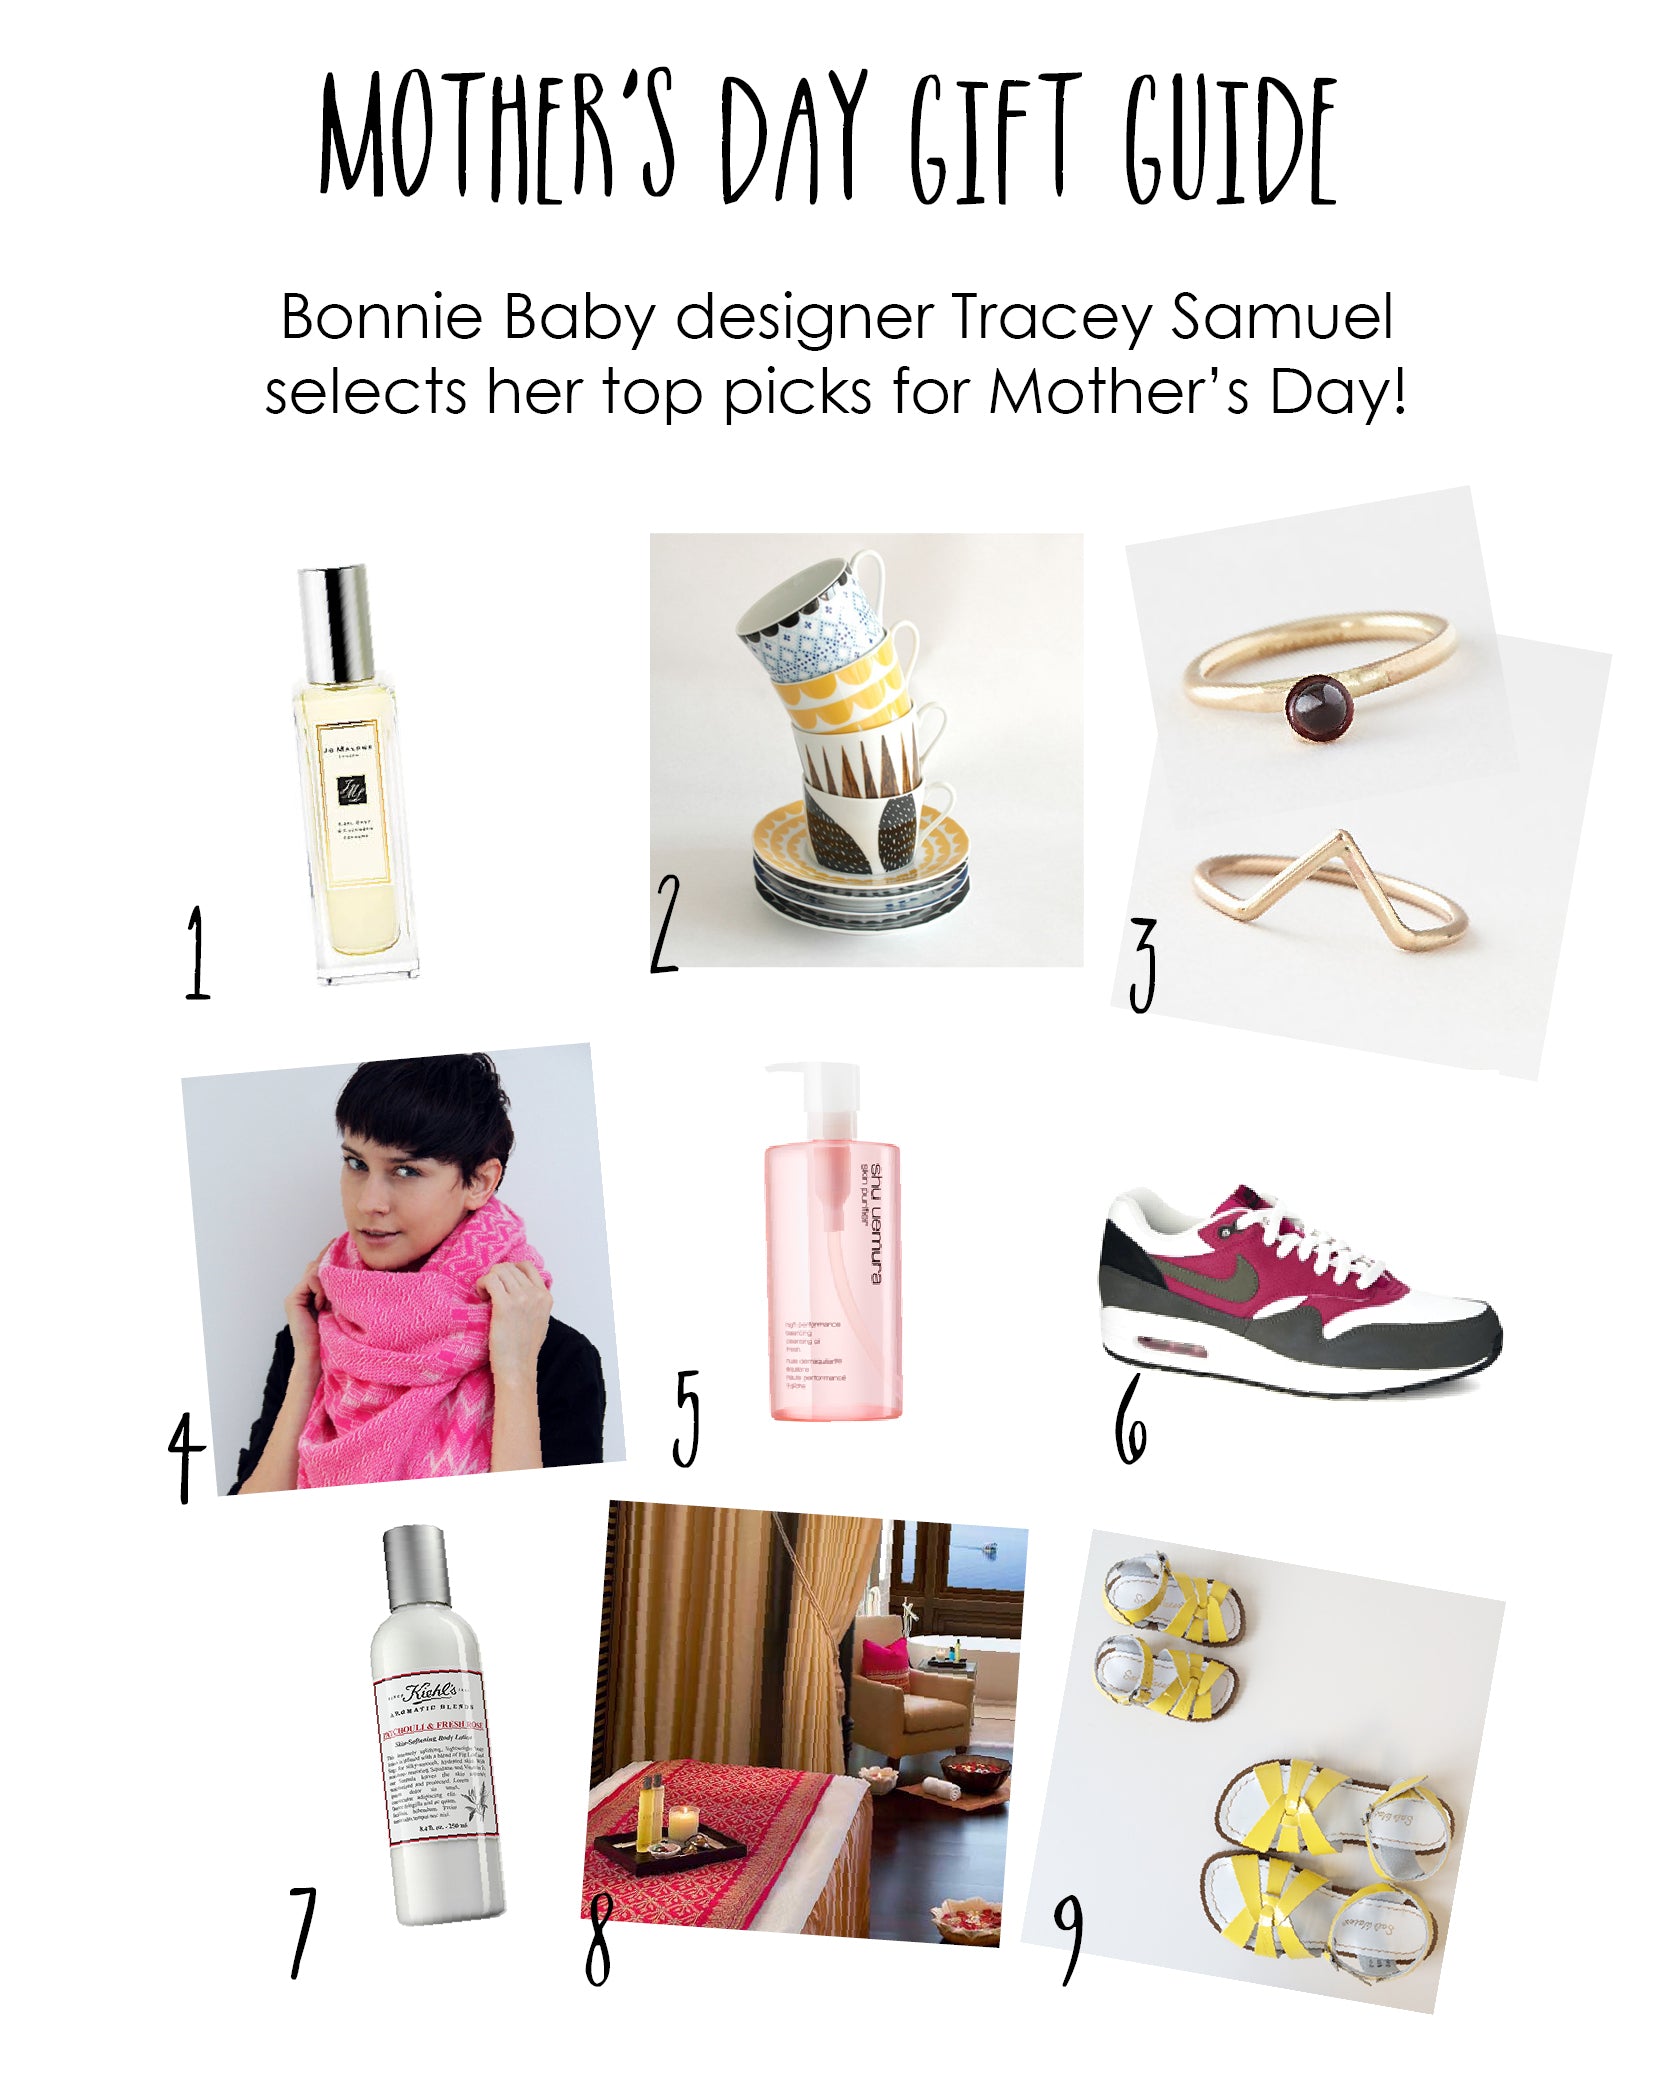 MOTHERS DAY GIFT GUIDE FROM DESIGNER TRACEY SAMUEL